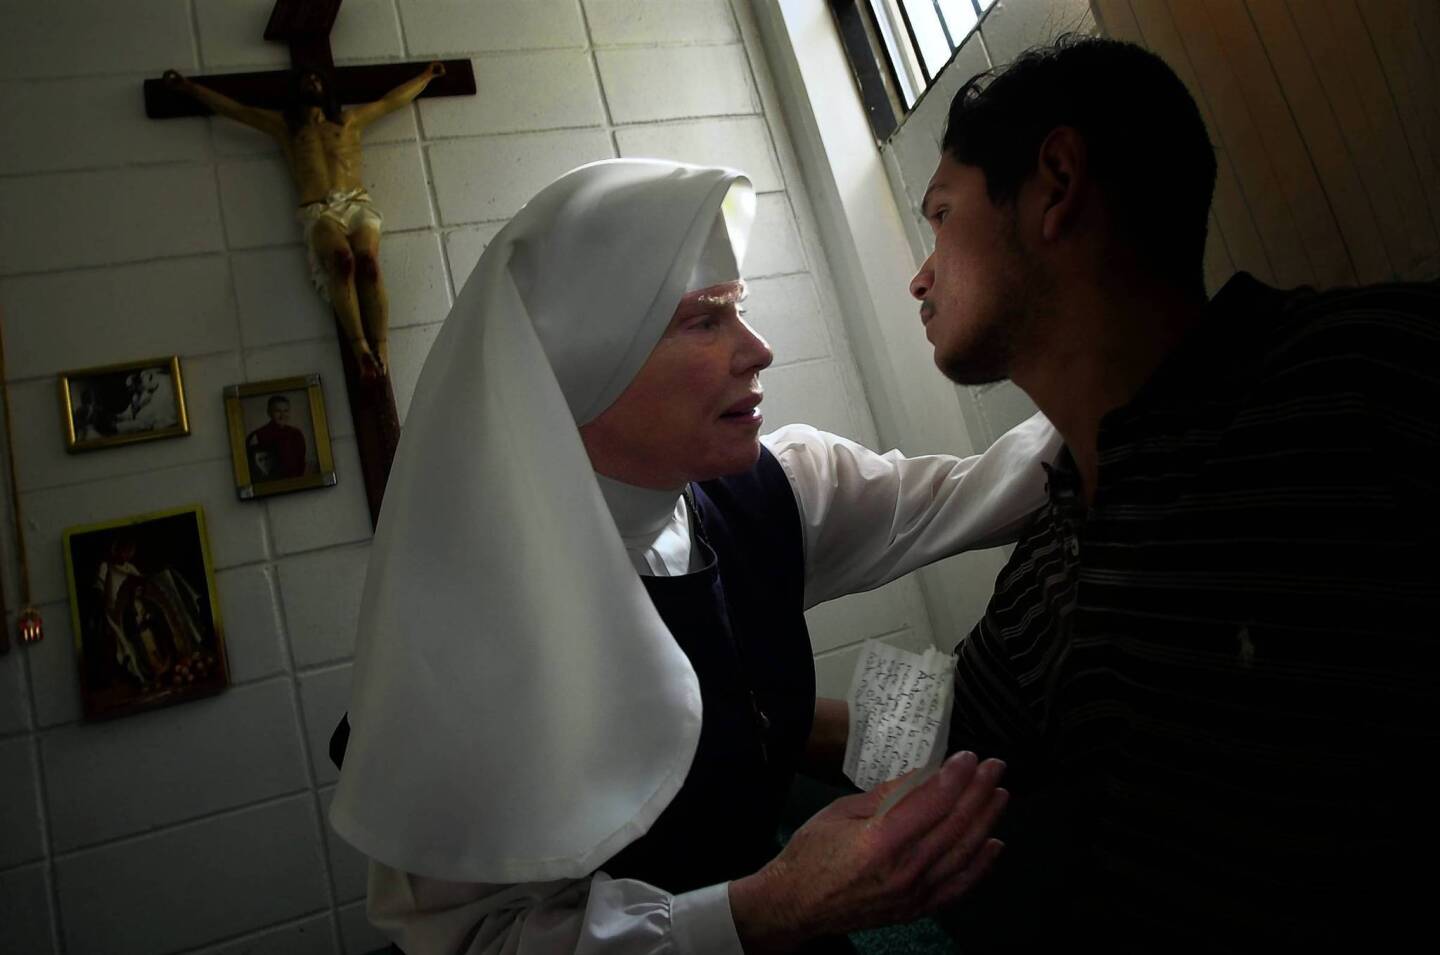 In this photo from 2002, Sister Antonia Brenner consoles inmate Jorge Villalobos inside her converted cell at the notorious La Mesa penitentiary in Tijuana. Brenner died Thursday at the age of 86.